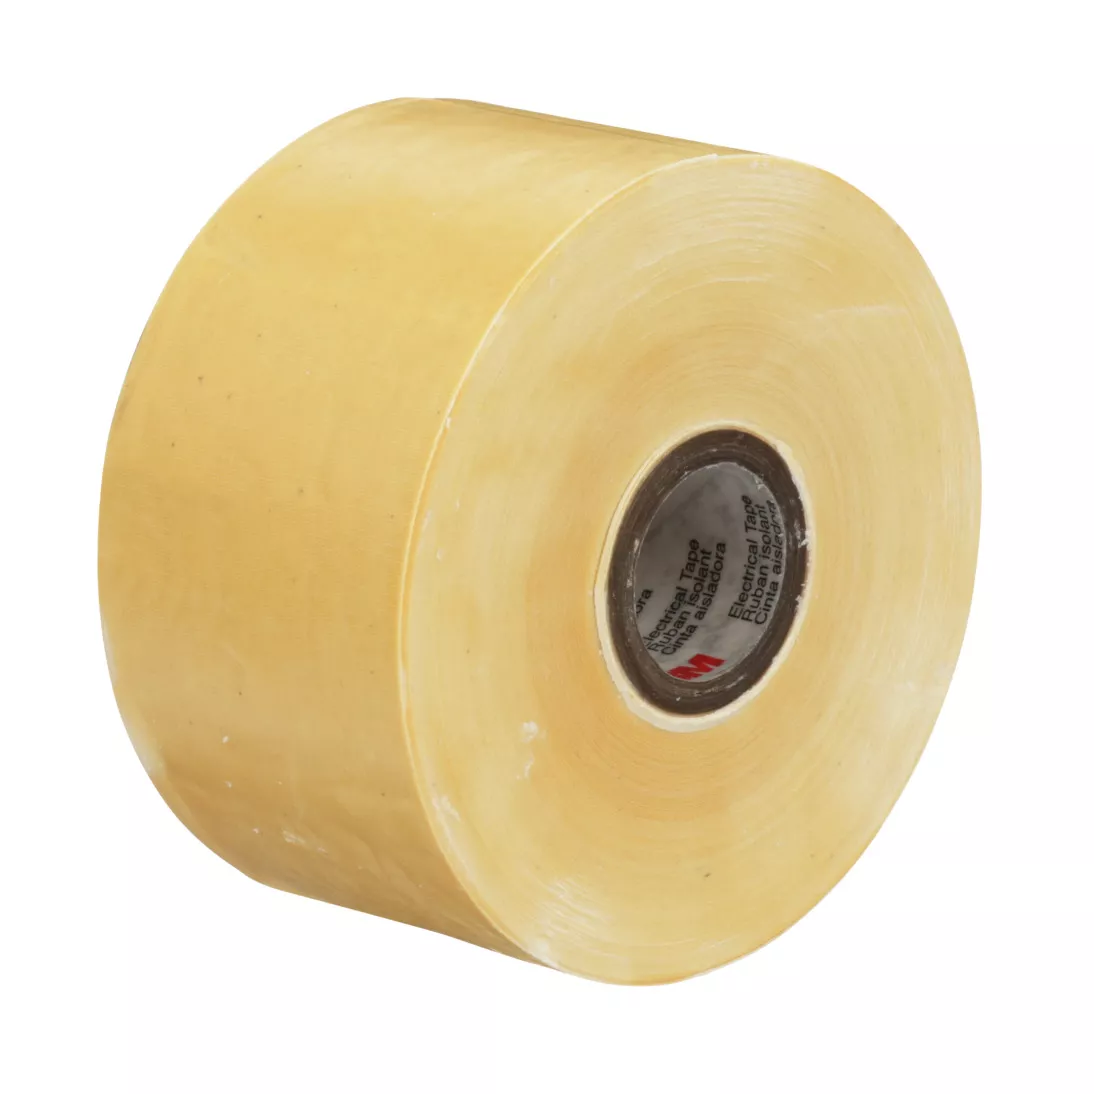 Scotch® Varnished Cambric Tape 2510, 2 in x 36 yd, Yellow, 4
rolls/carton, 16 rolls/Case